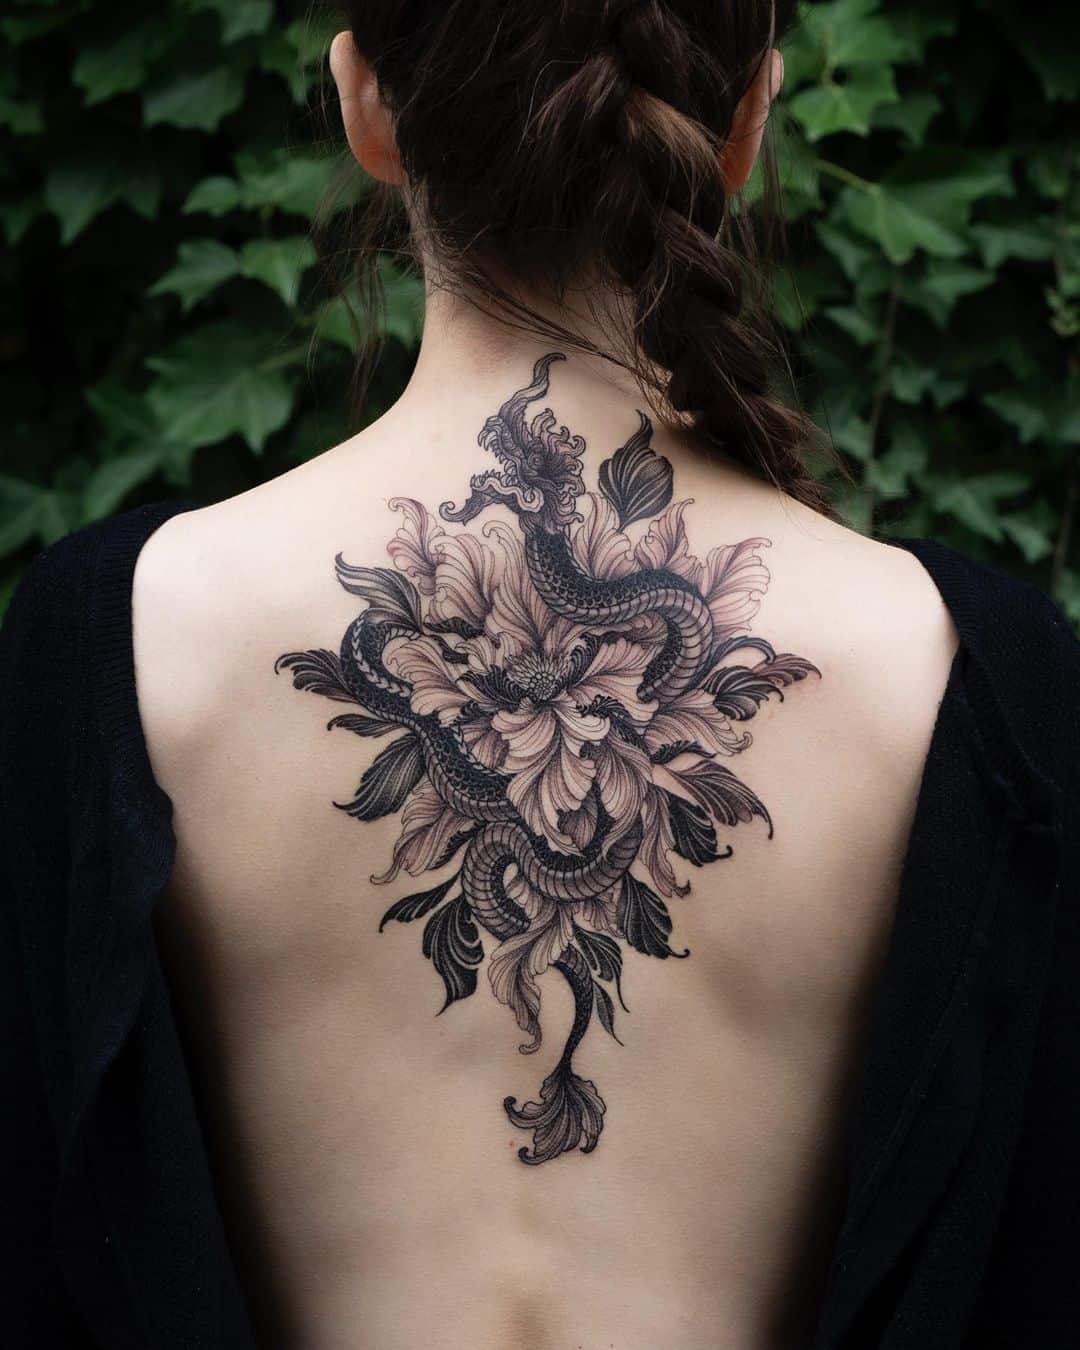 Spine tattoo  Tattoos for women flowers Cute tattoos for women Spine  tattoos for women